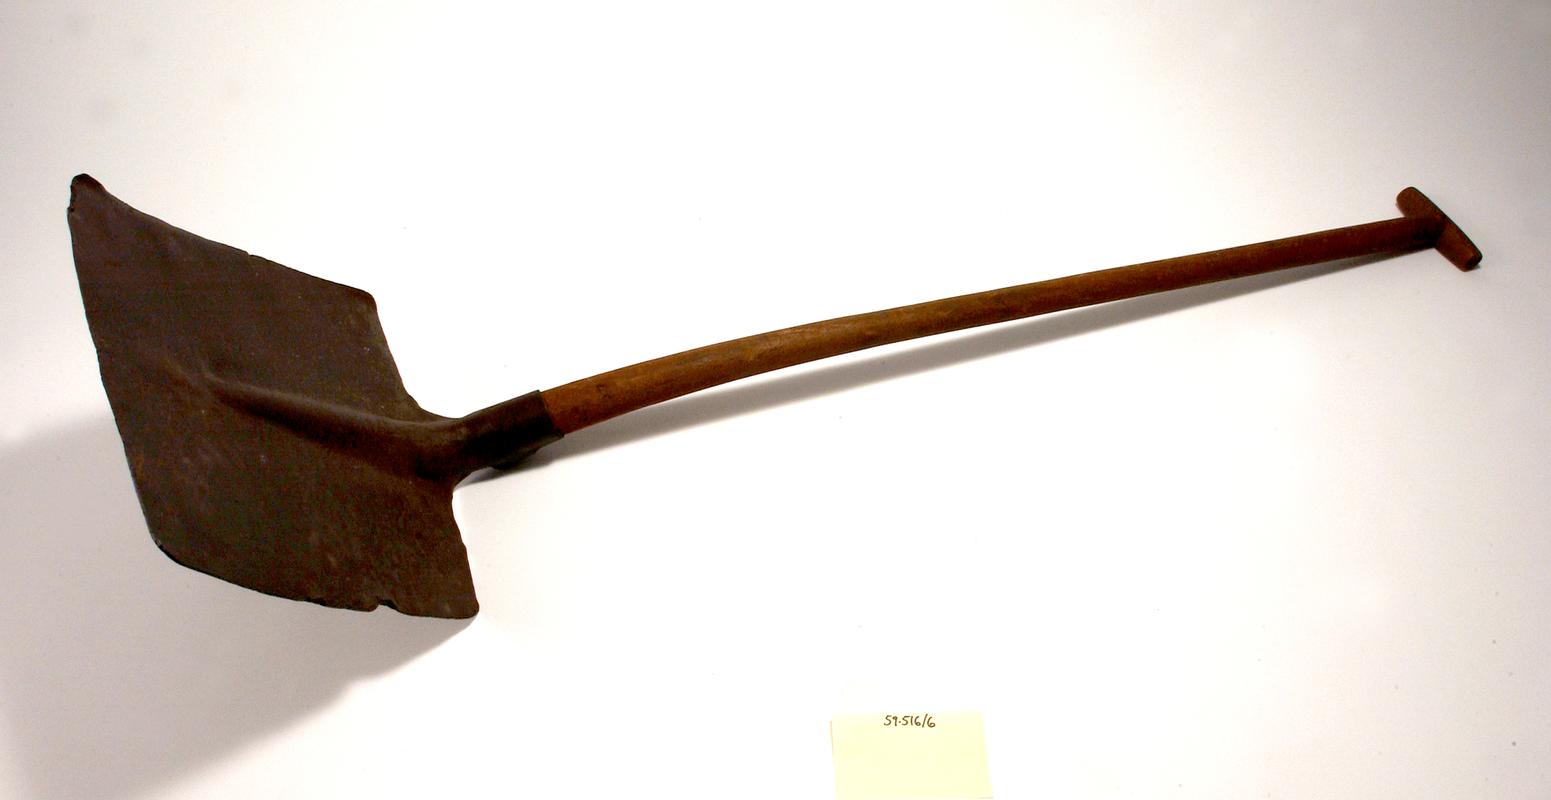 Furnace shovel with wooden handle